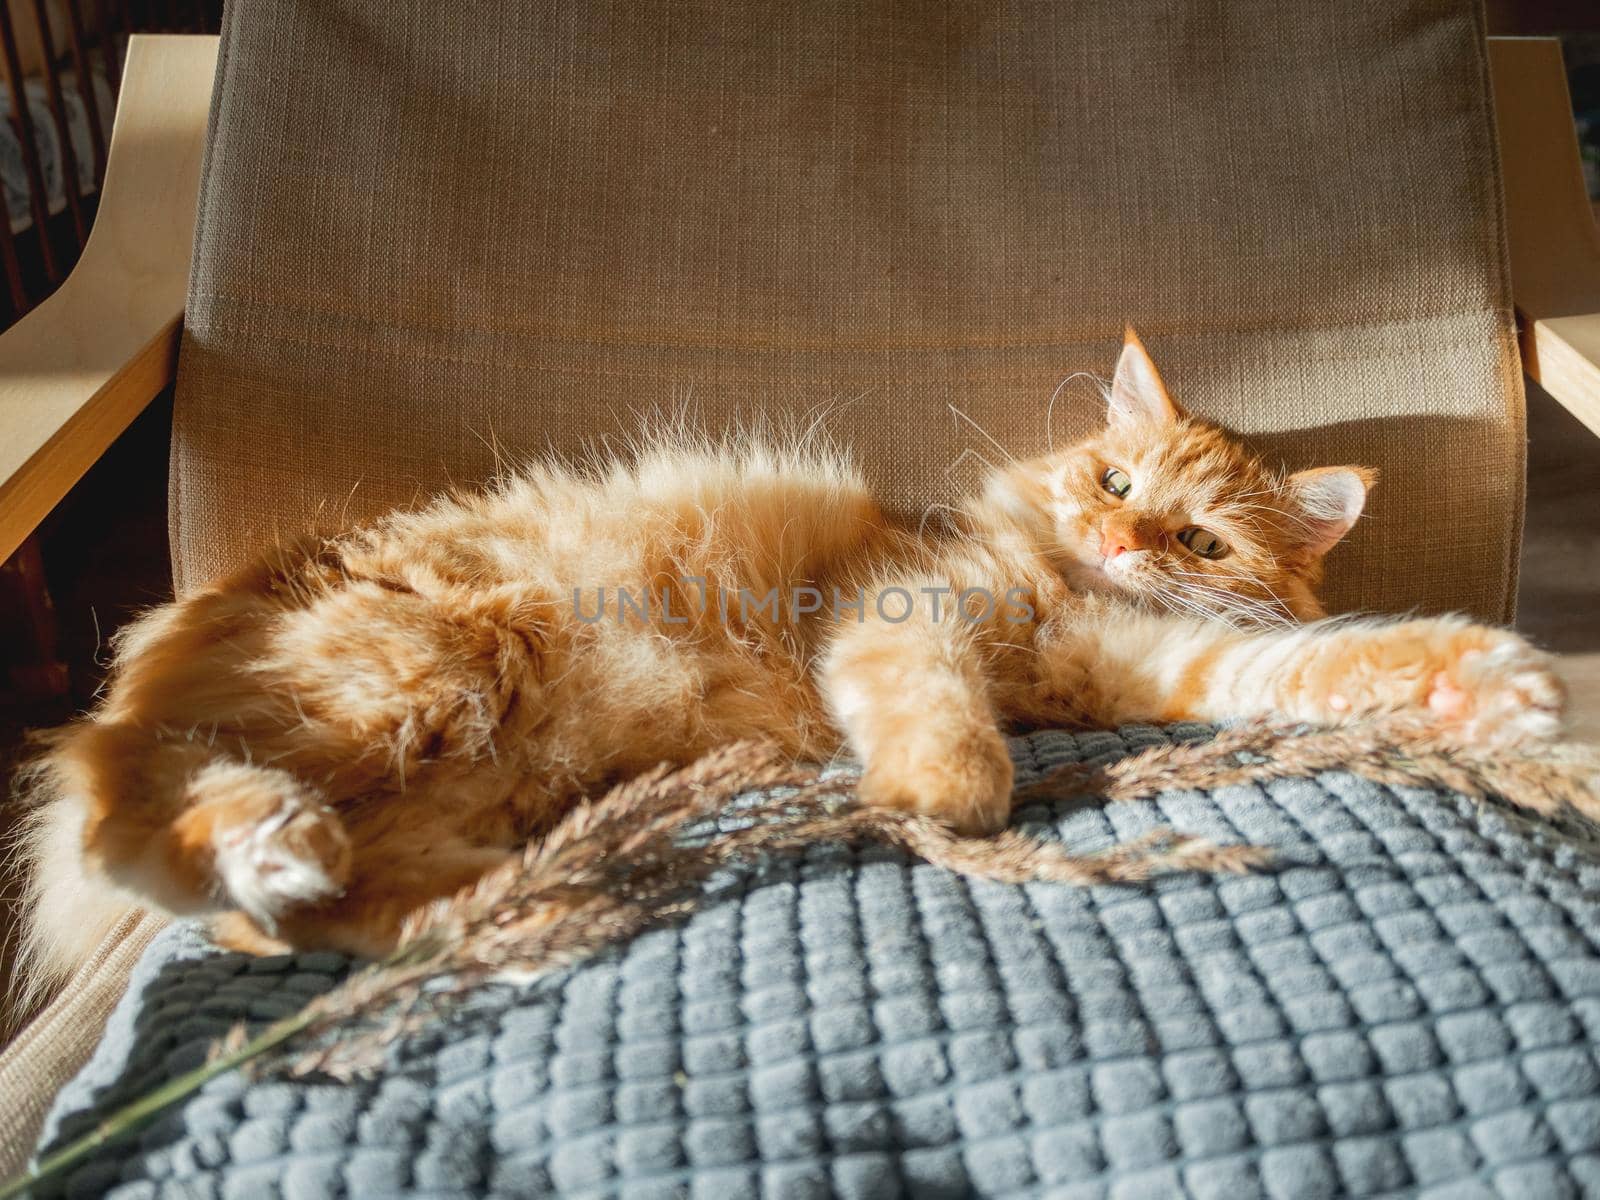 Cute ginger cat lying on pillow. Woman id using dried grass used as toy for fluffy pet. Cozy home lit with sun.